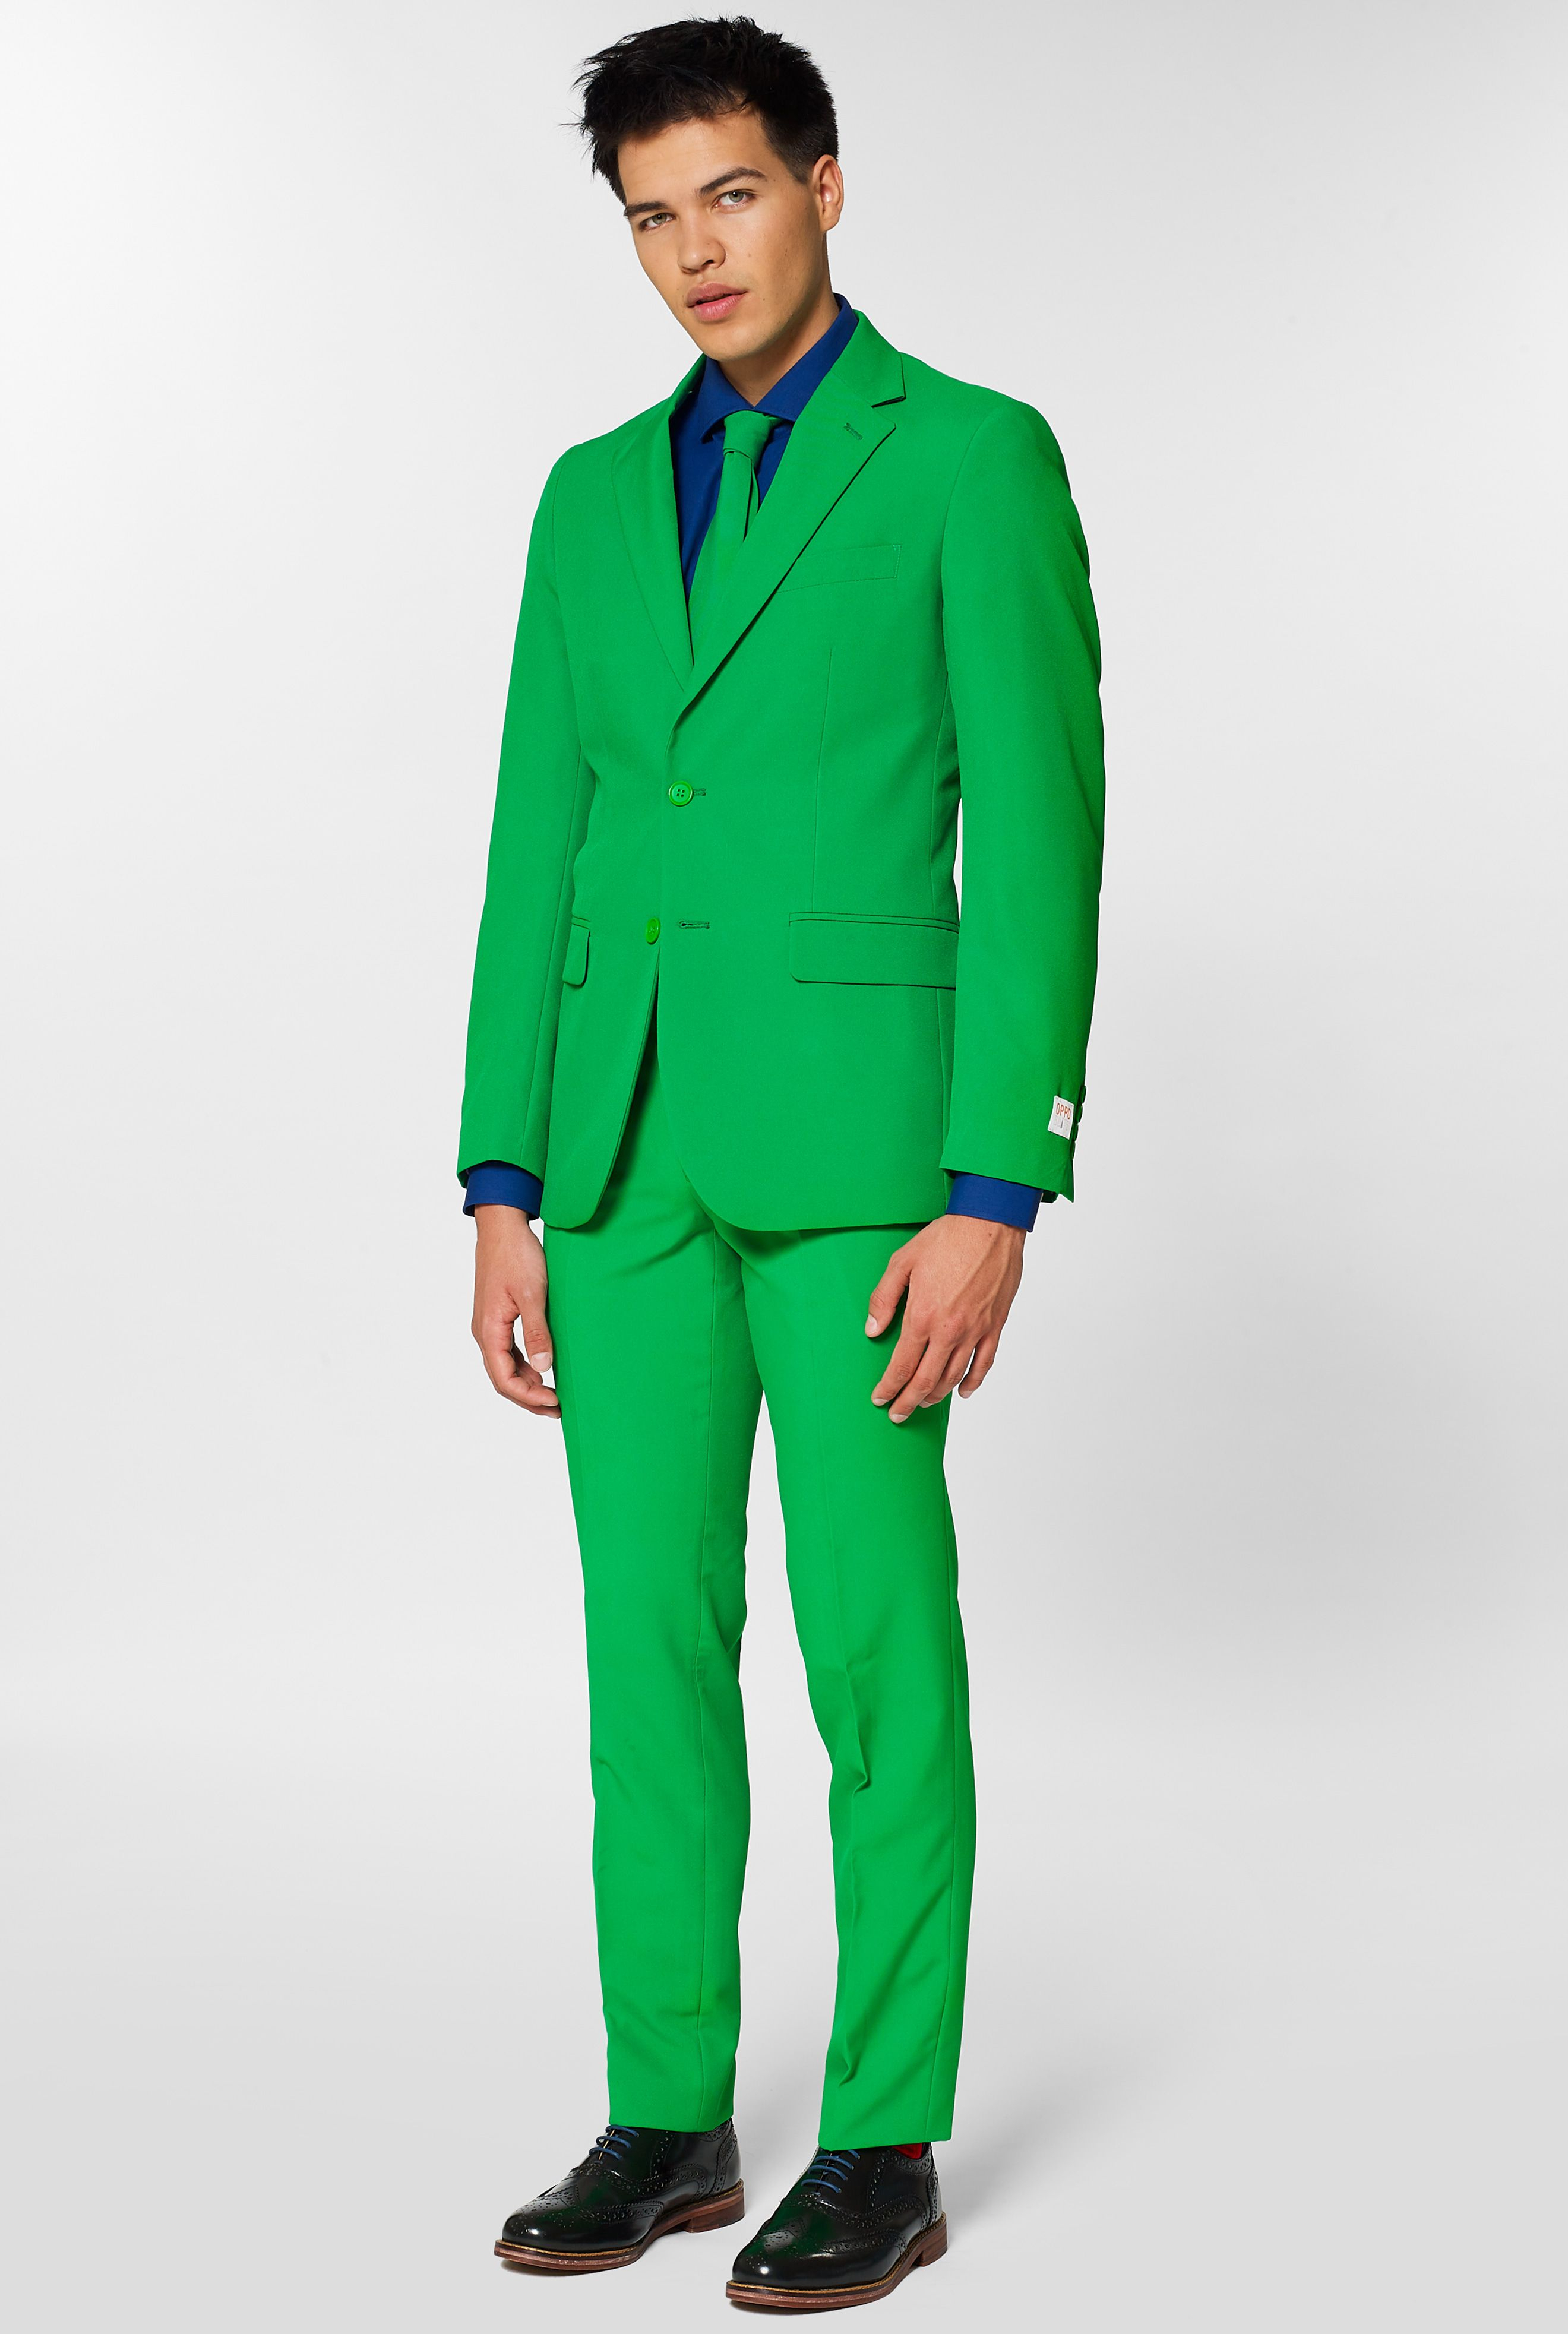 Jacket And Tie opposuits Evergreen Solid Green Suit for Men Coming with Pants 